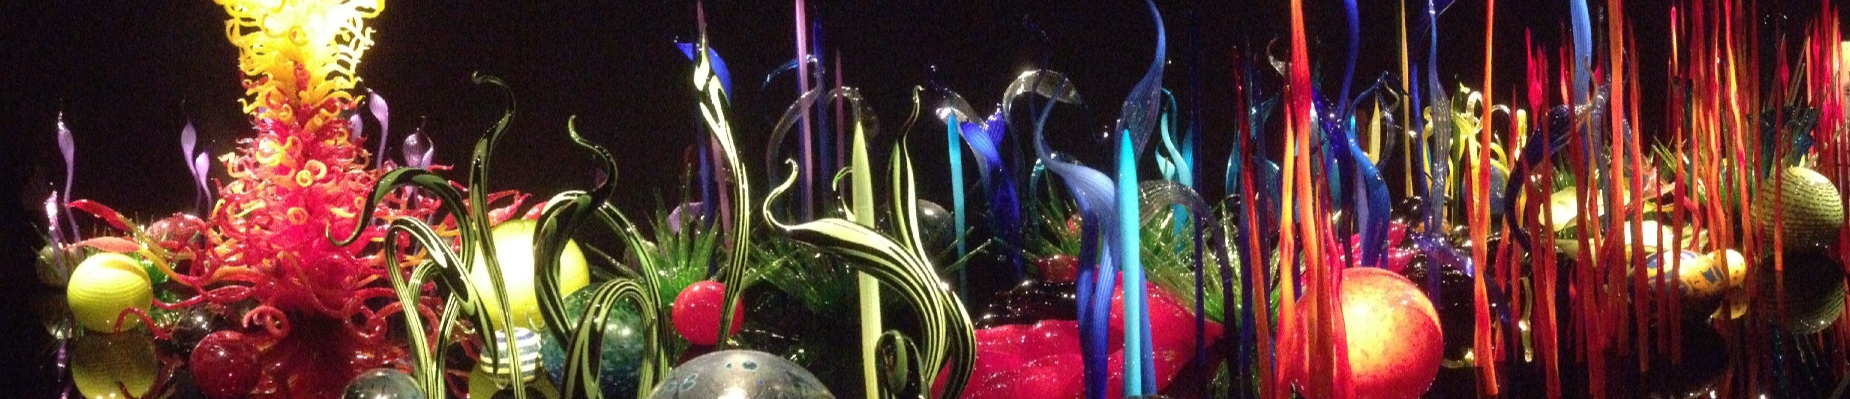 colorful Chihuly glass sculptures